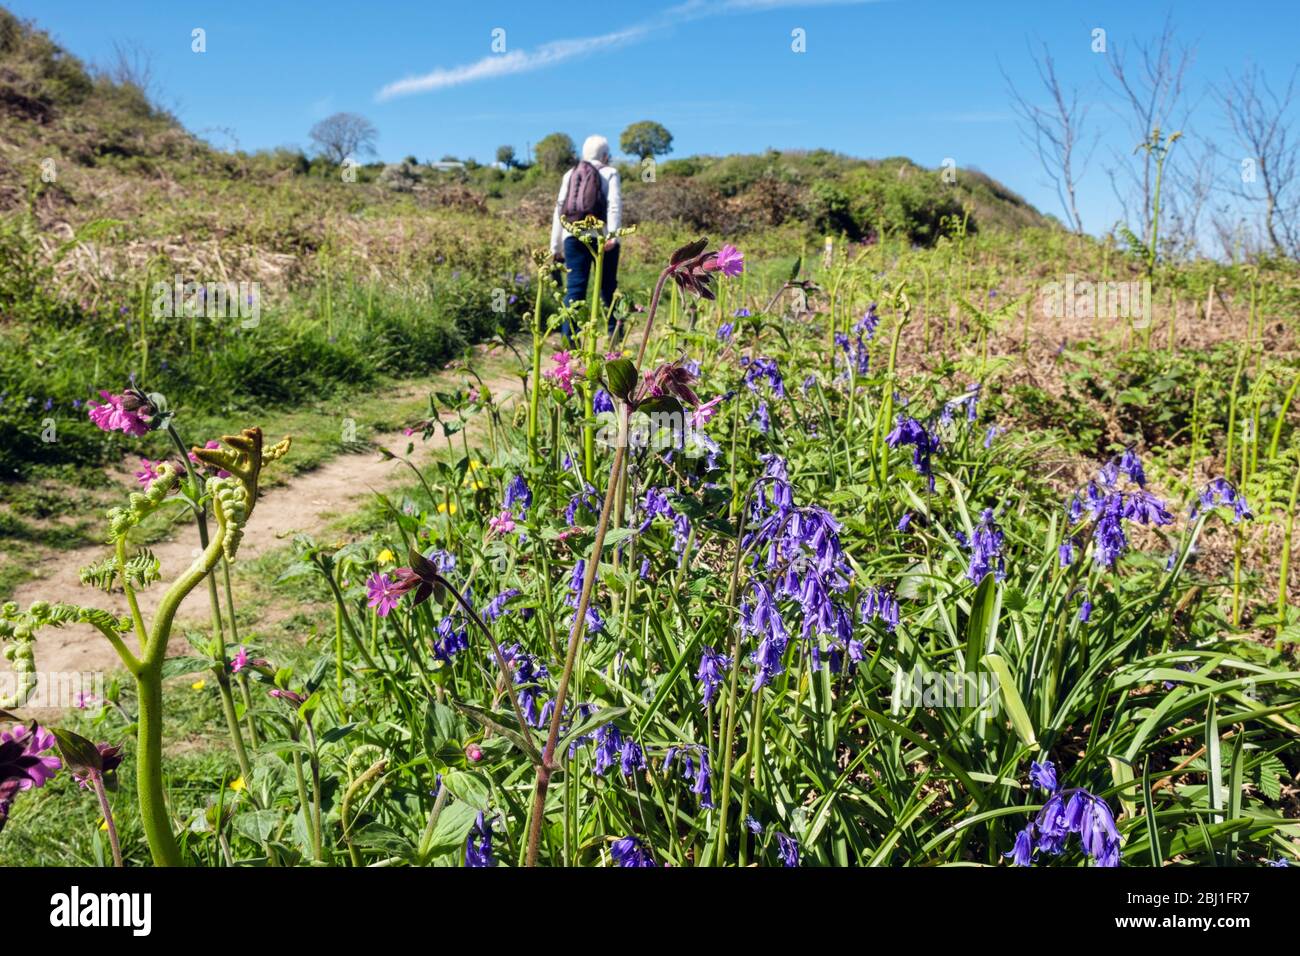 Bluebells growing in countryside along Coastal Footpath with a walker walking away in spring. Benllech, Isle of Anglesey, north Wales, UK, Britain Stock Photo